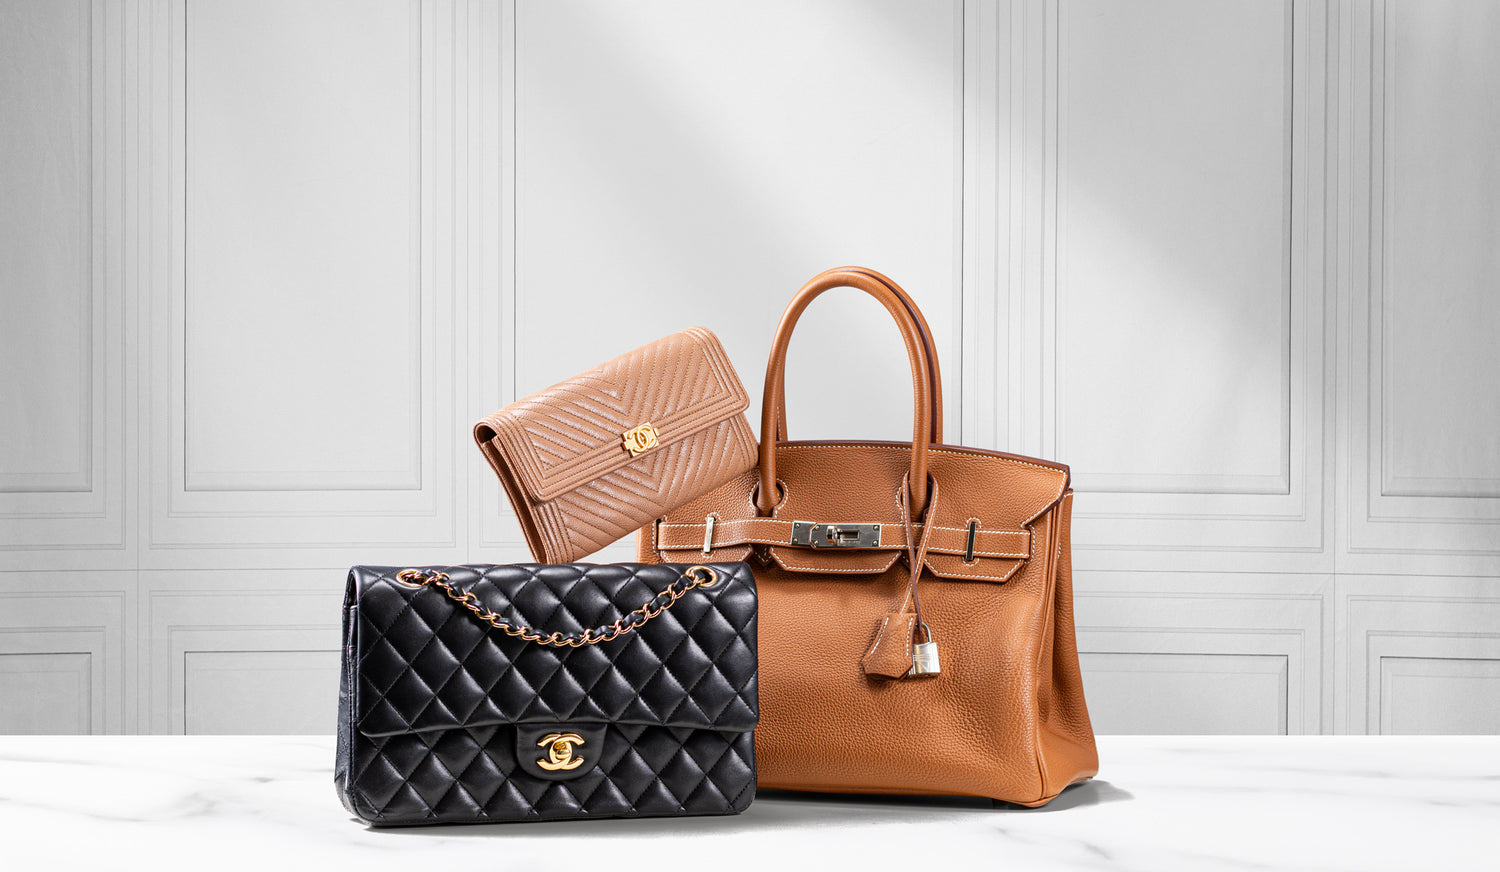 Icons Only Drop - Chanel, Hermes and more 